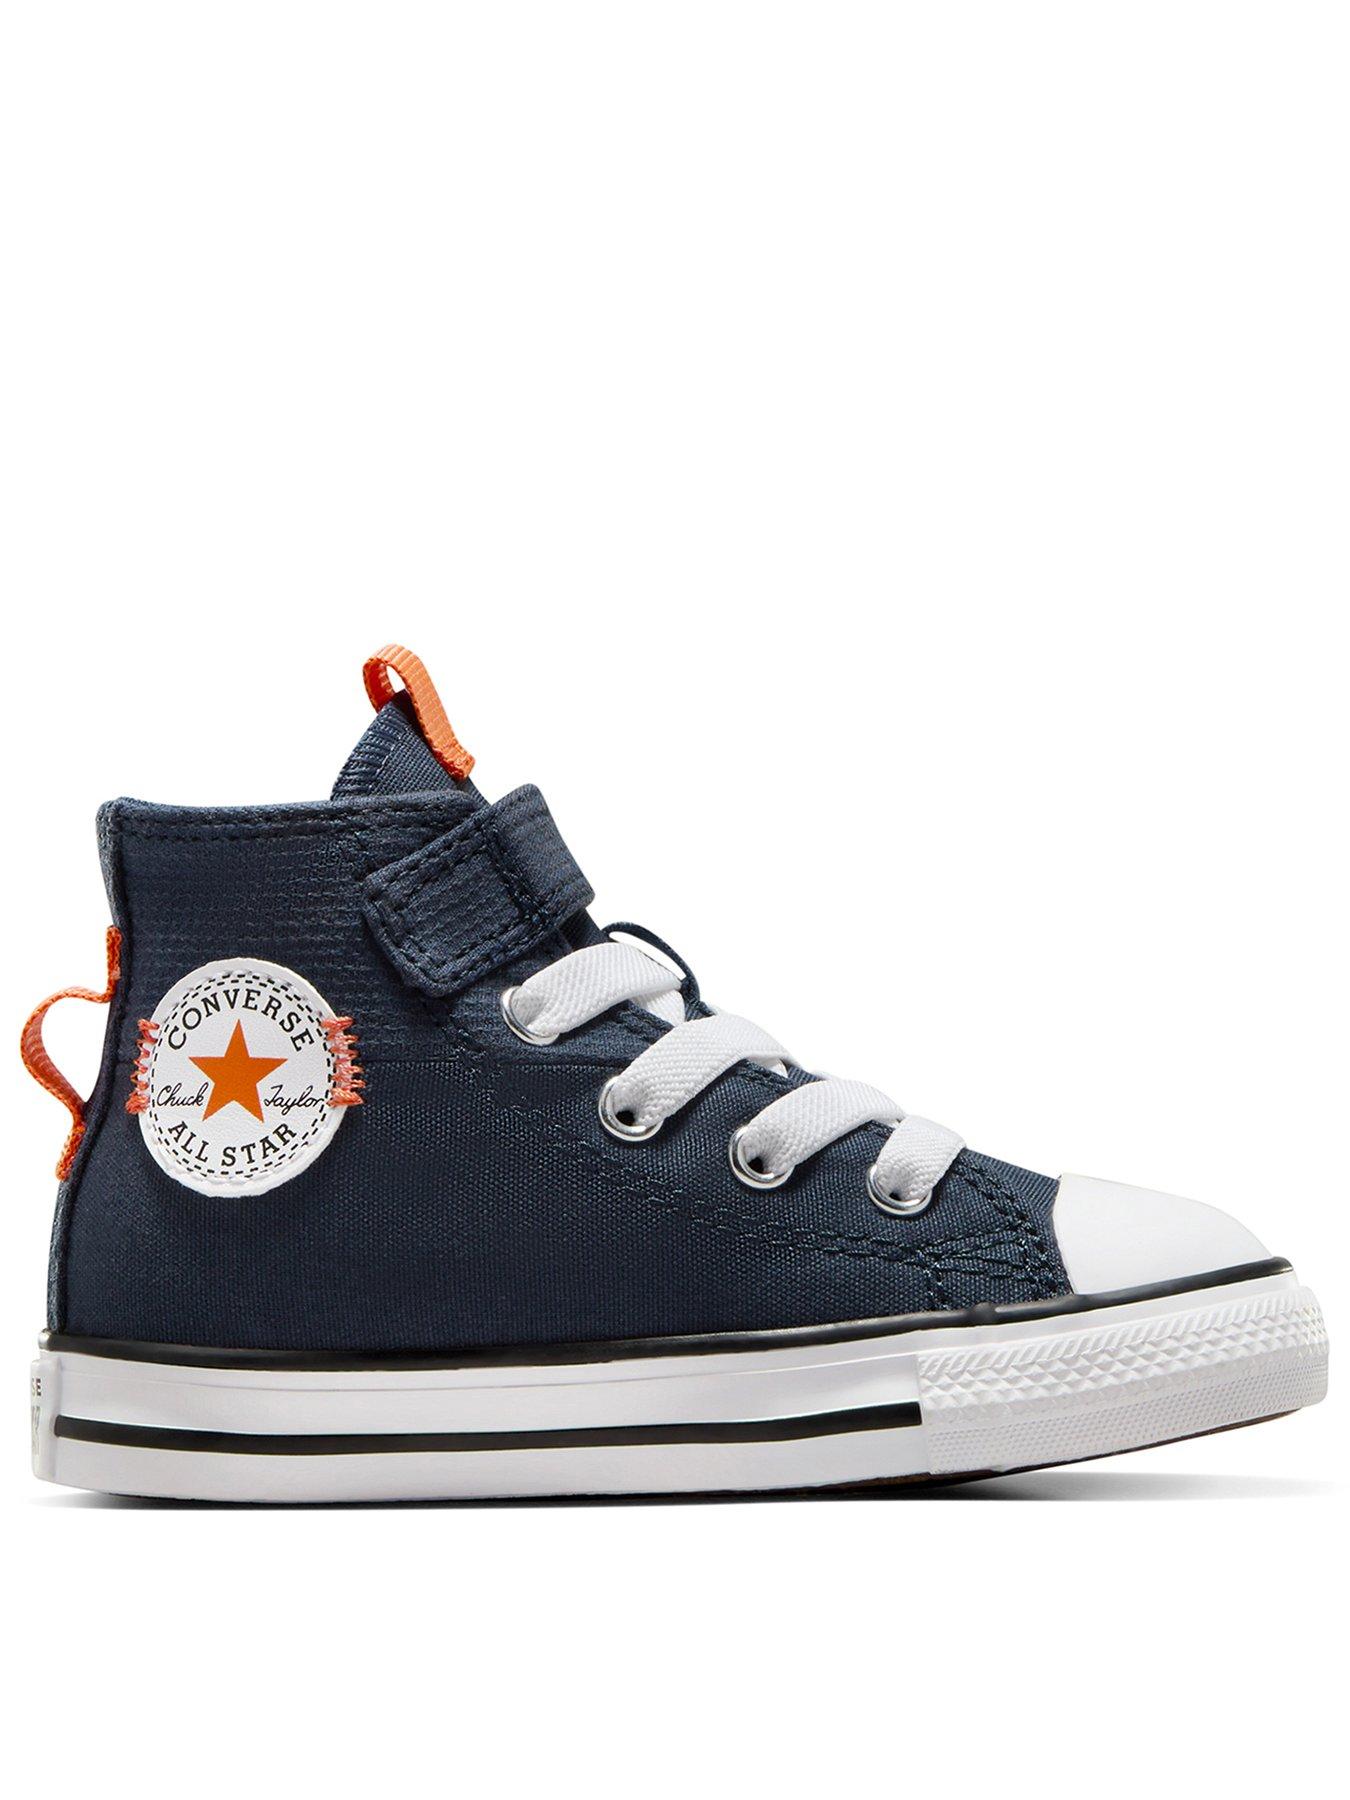 Converse Infant Boys Easy-On Velcro Day Trip Utility High Tops Trainers - Navy, Navy, Size 7 Younger